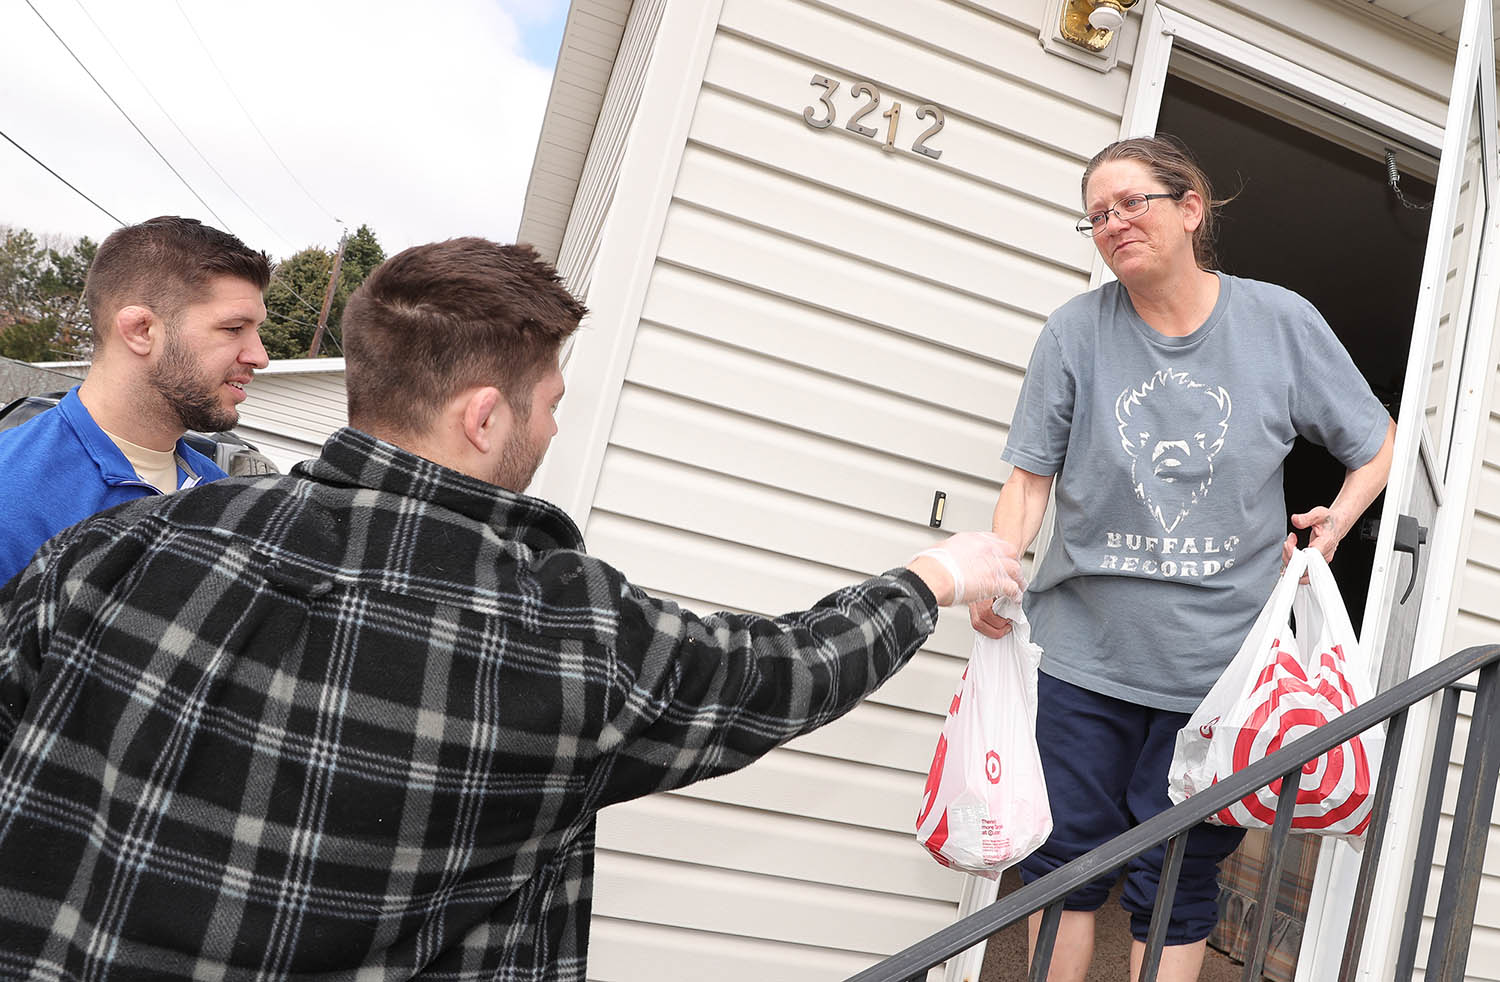 UNK wrestlers Anthony Mancini, left, and Matt Malcom deliver meals to Paula Cowen on Tuesday while volunteering for Hot Meals USA. (Photos by Corbey R. Dorsey, UNK Communications)